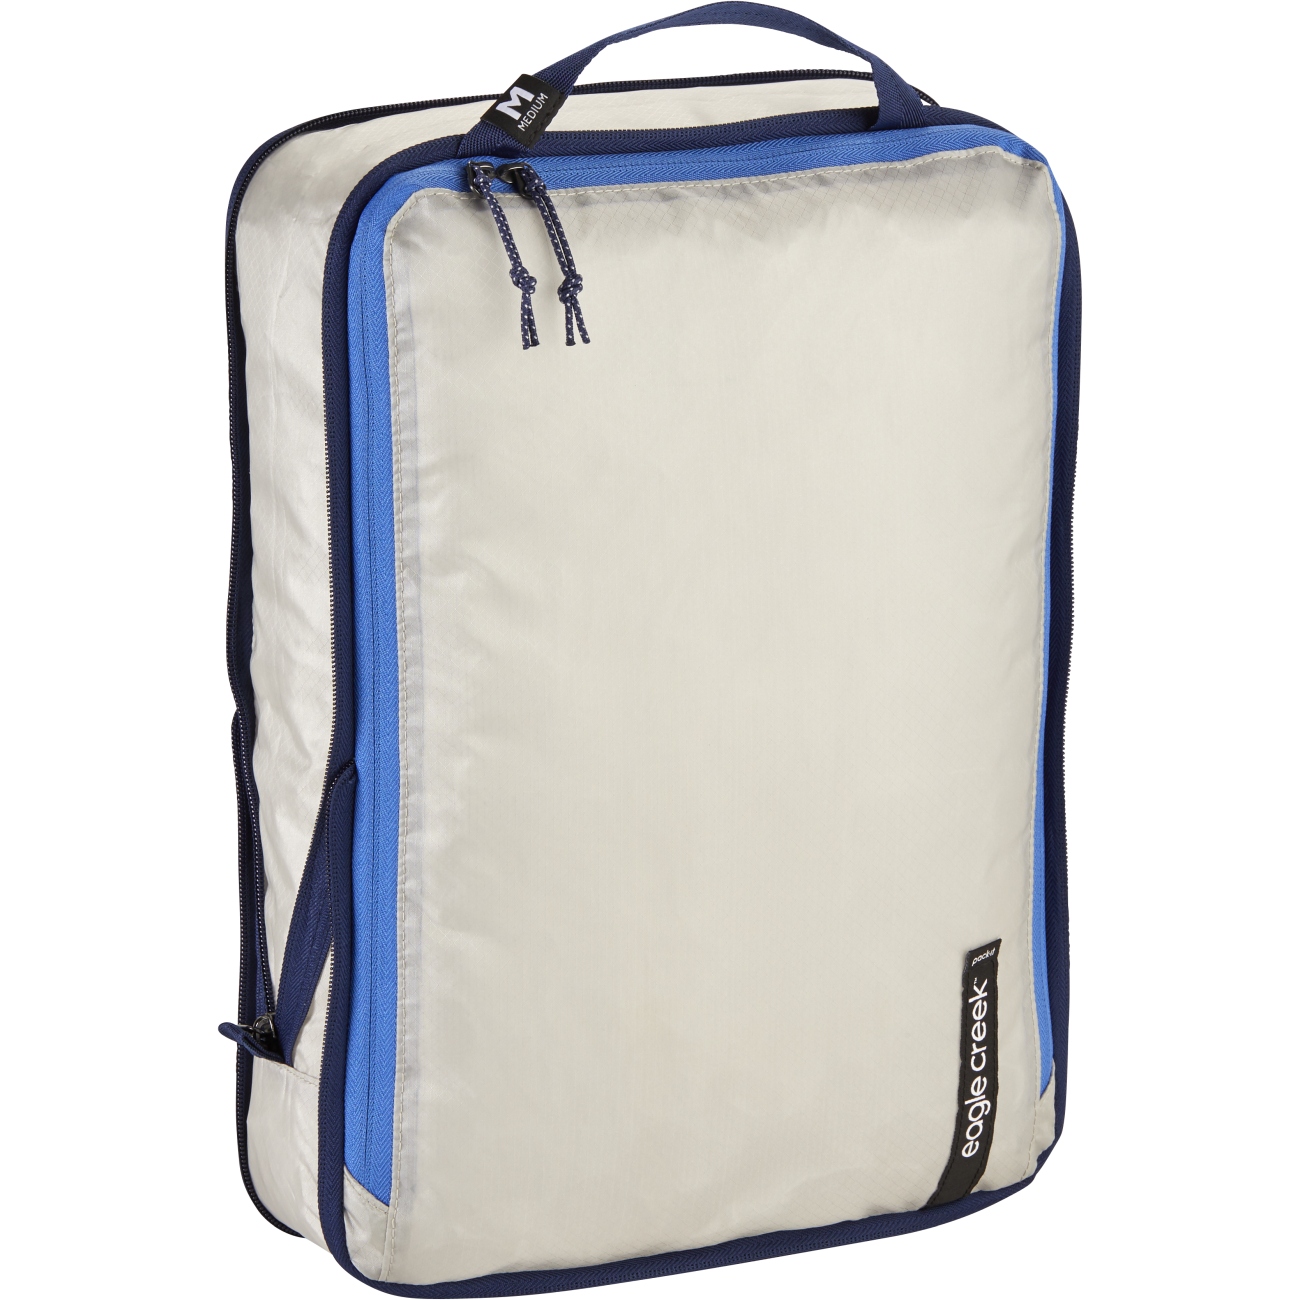 Productfoto van Eagle Creek Pack-It™ Isolate Compression Cube M - Tas Organizer - aizome blue grey